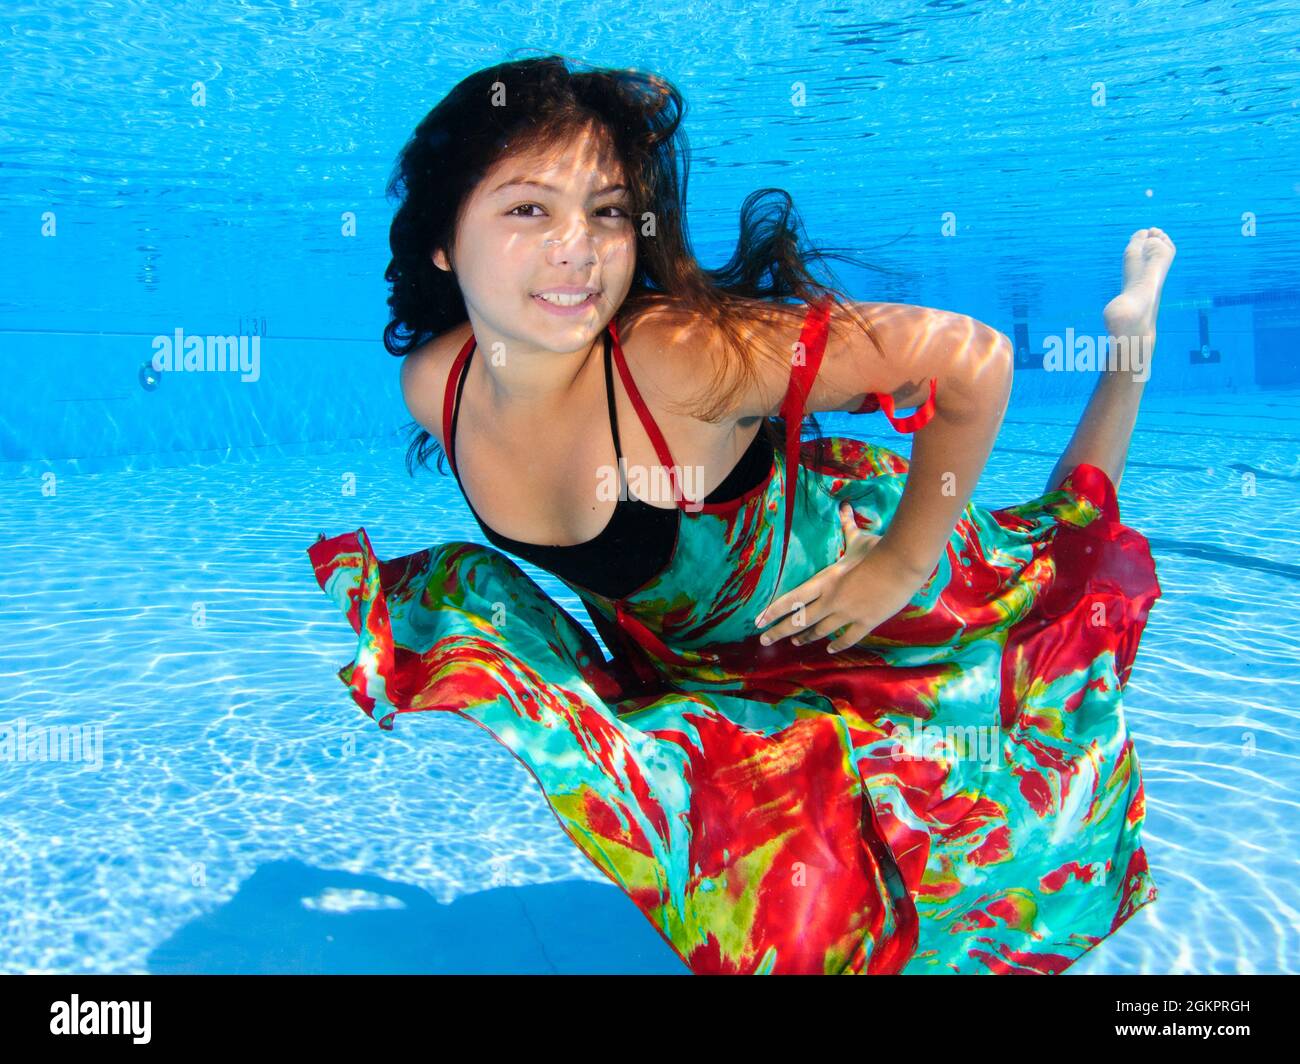 A 12 year old female teen dressed in colourful dress free diving underwater in a swimming pool. Model release available Stock Photo